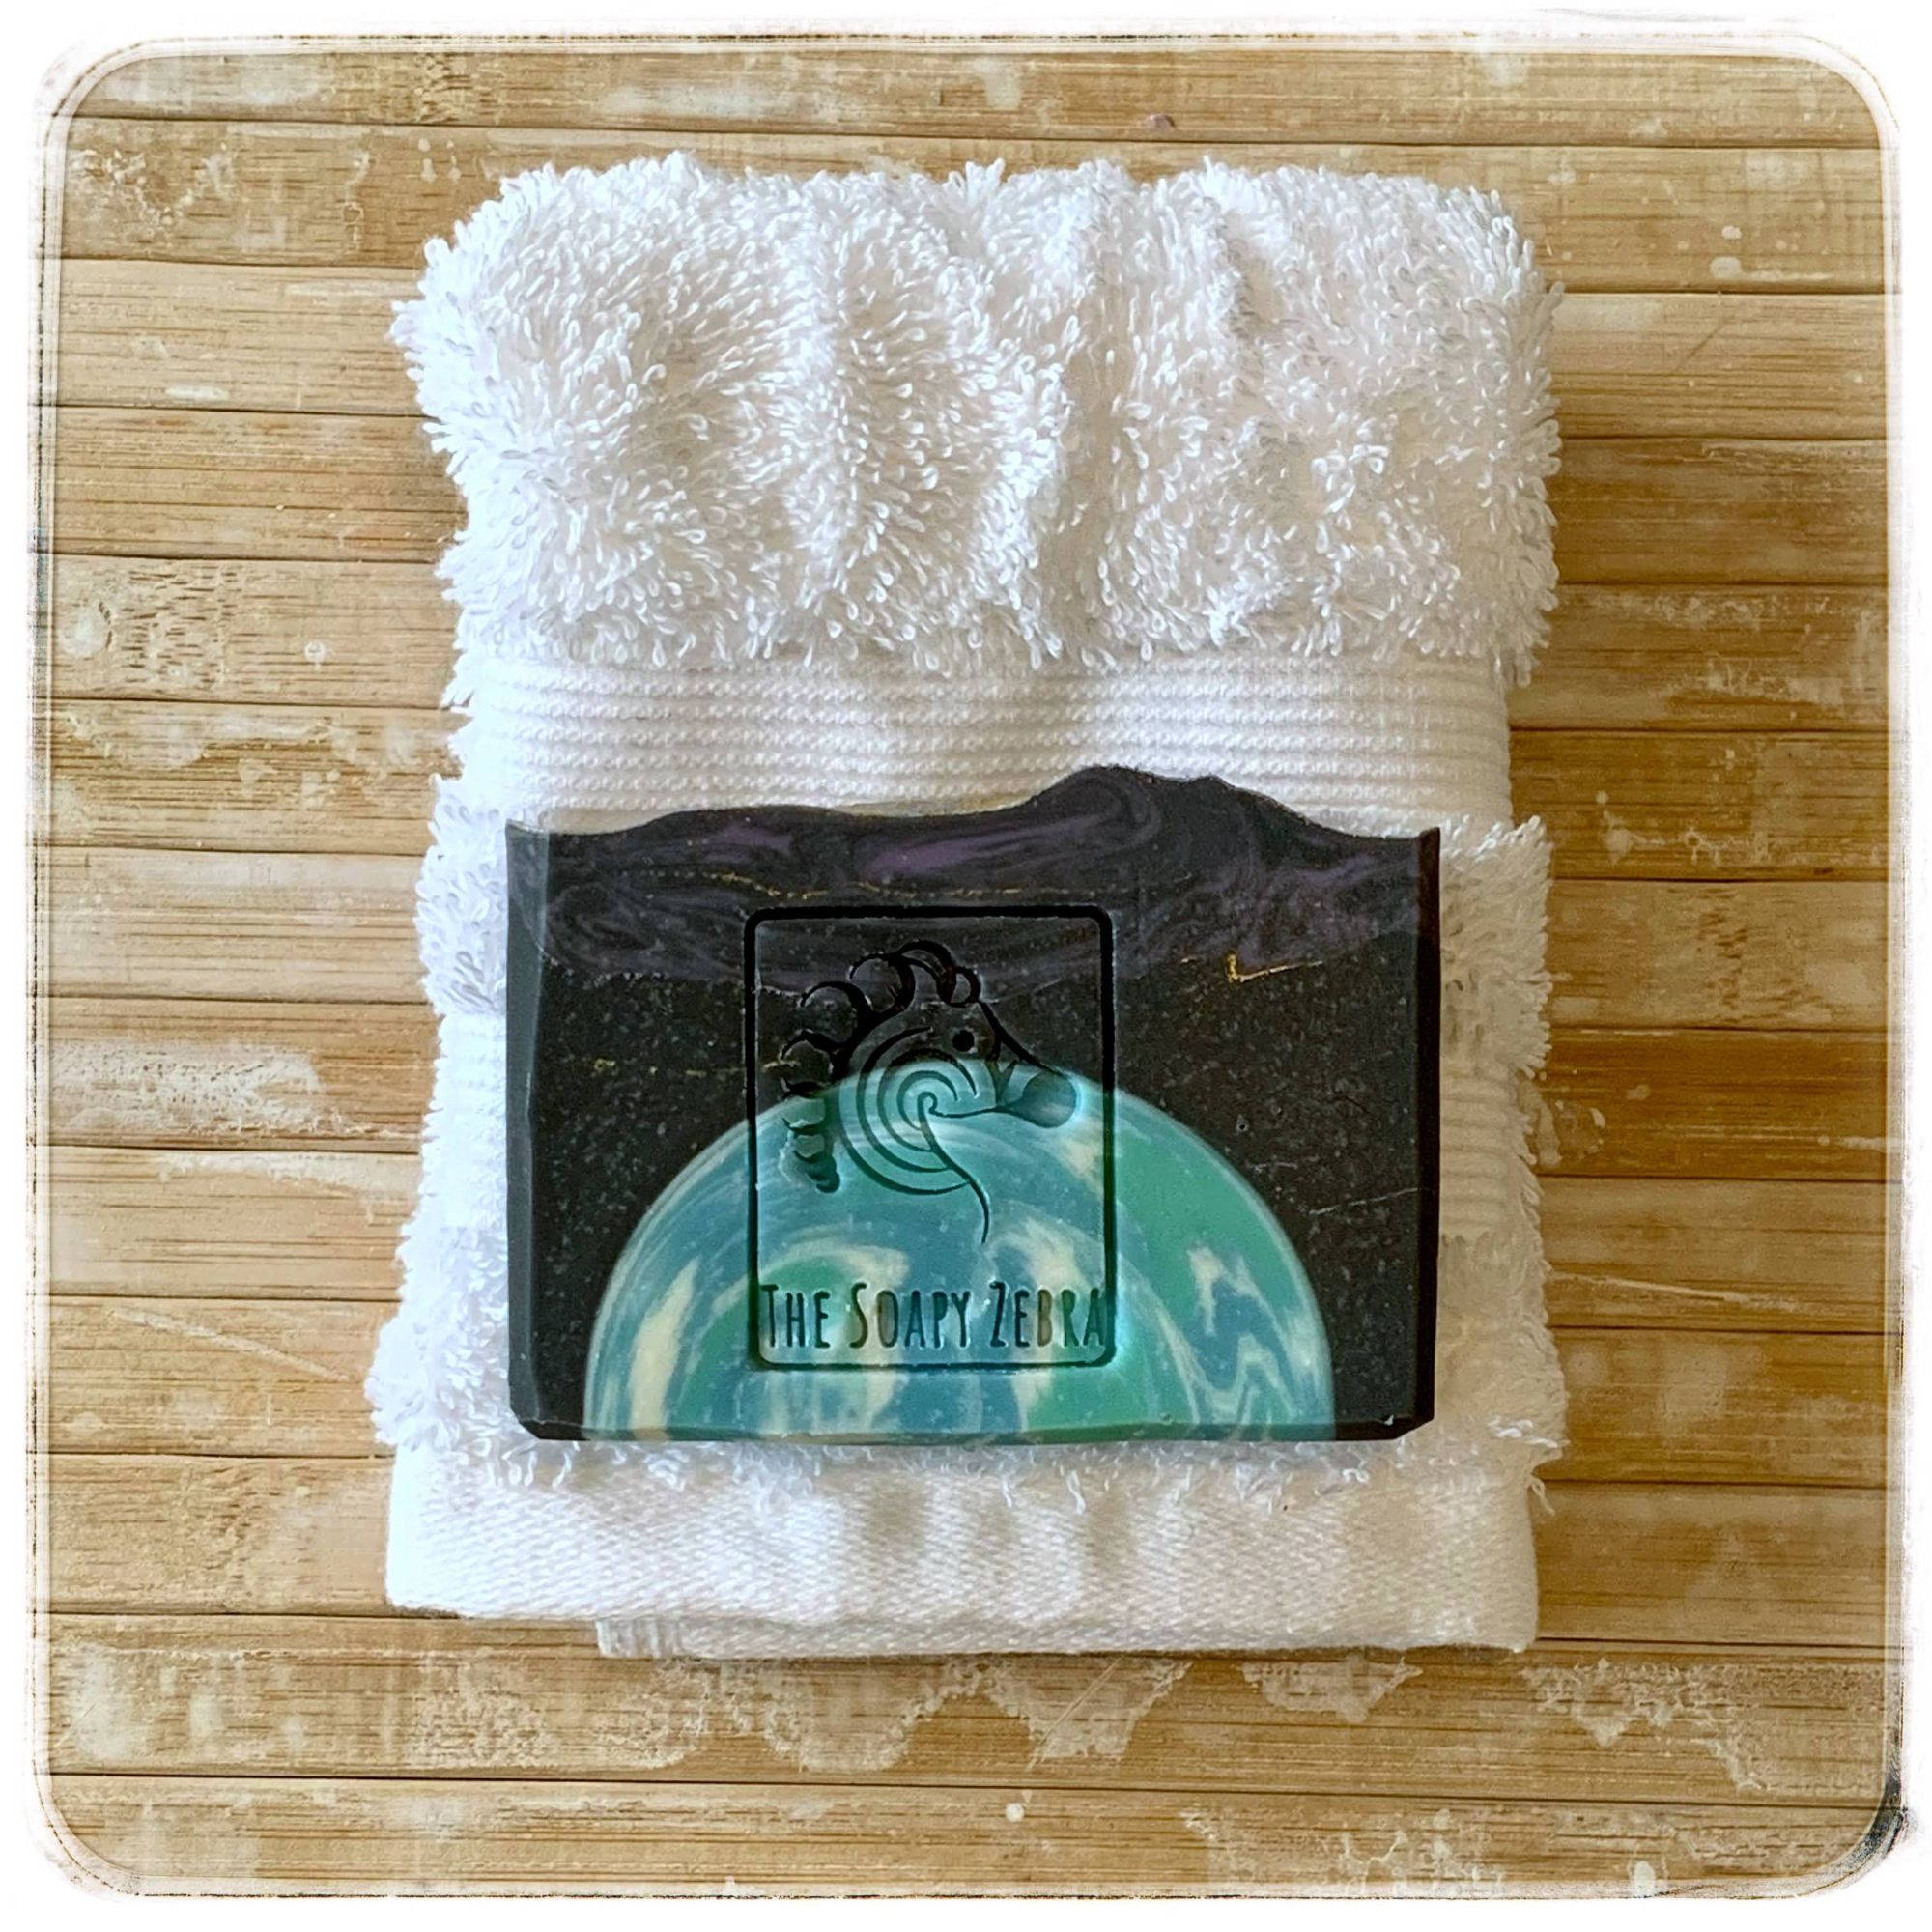 Mother Earth soap and flannel